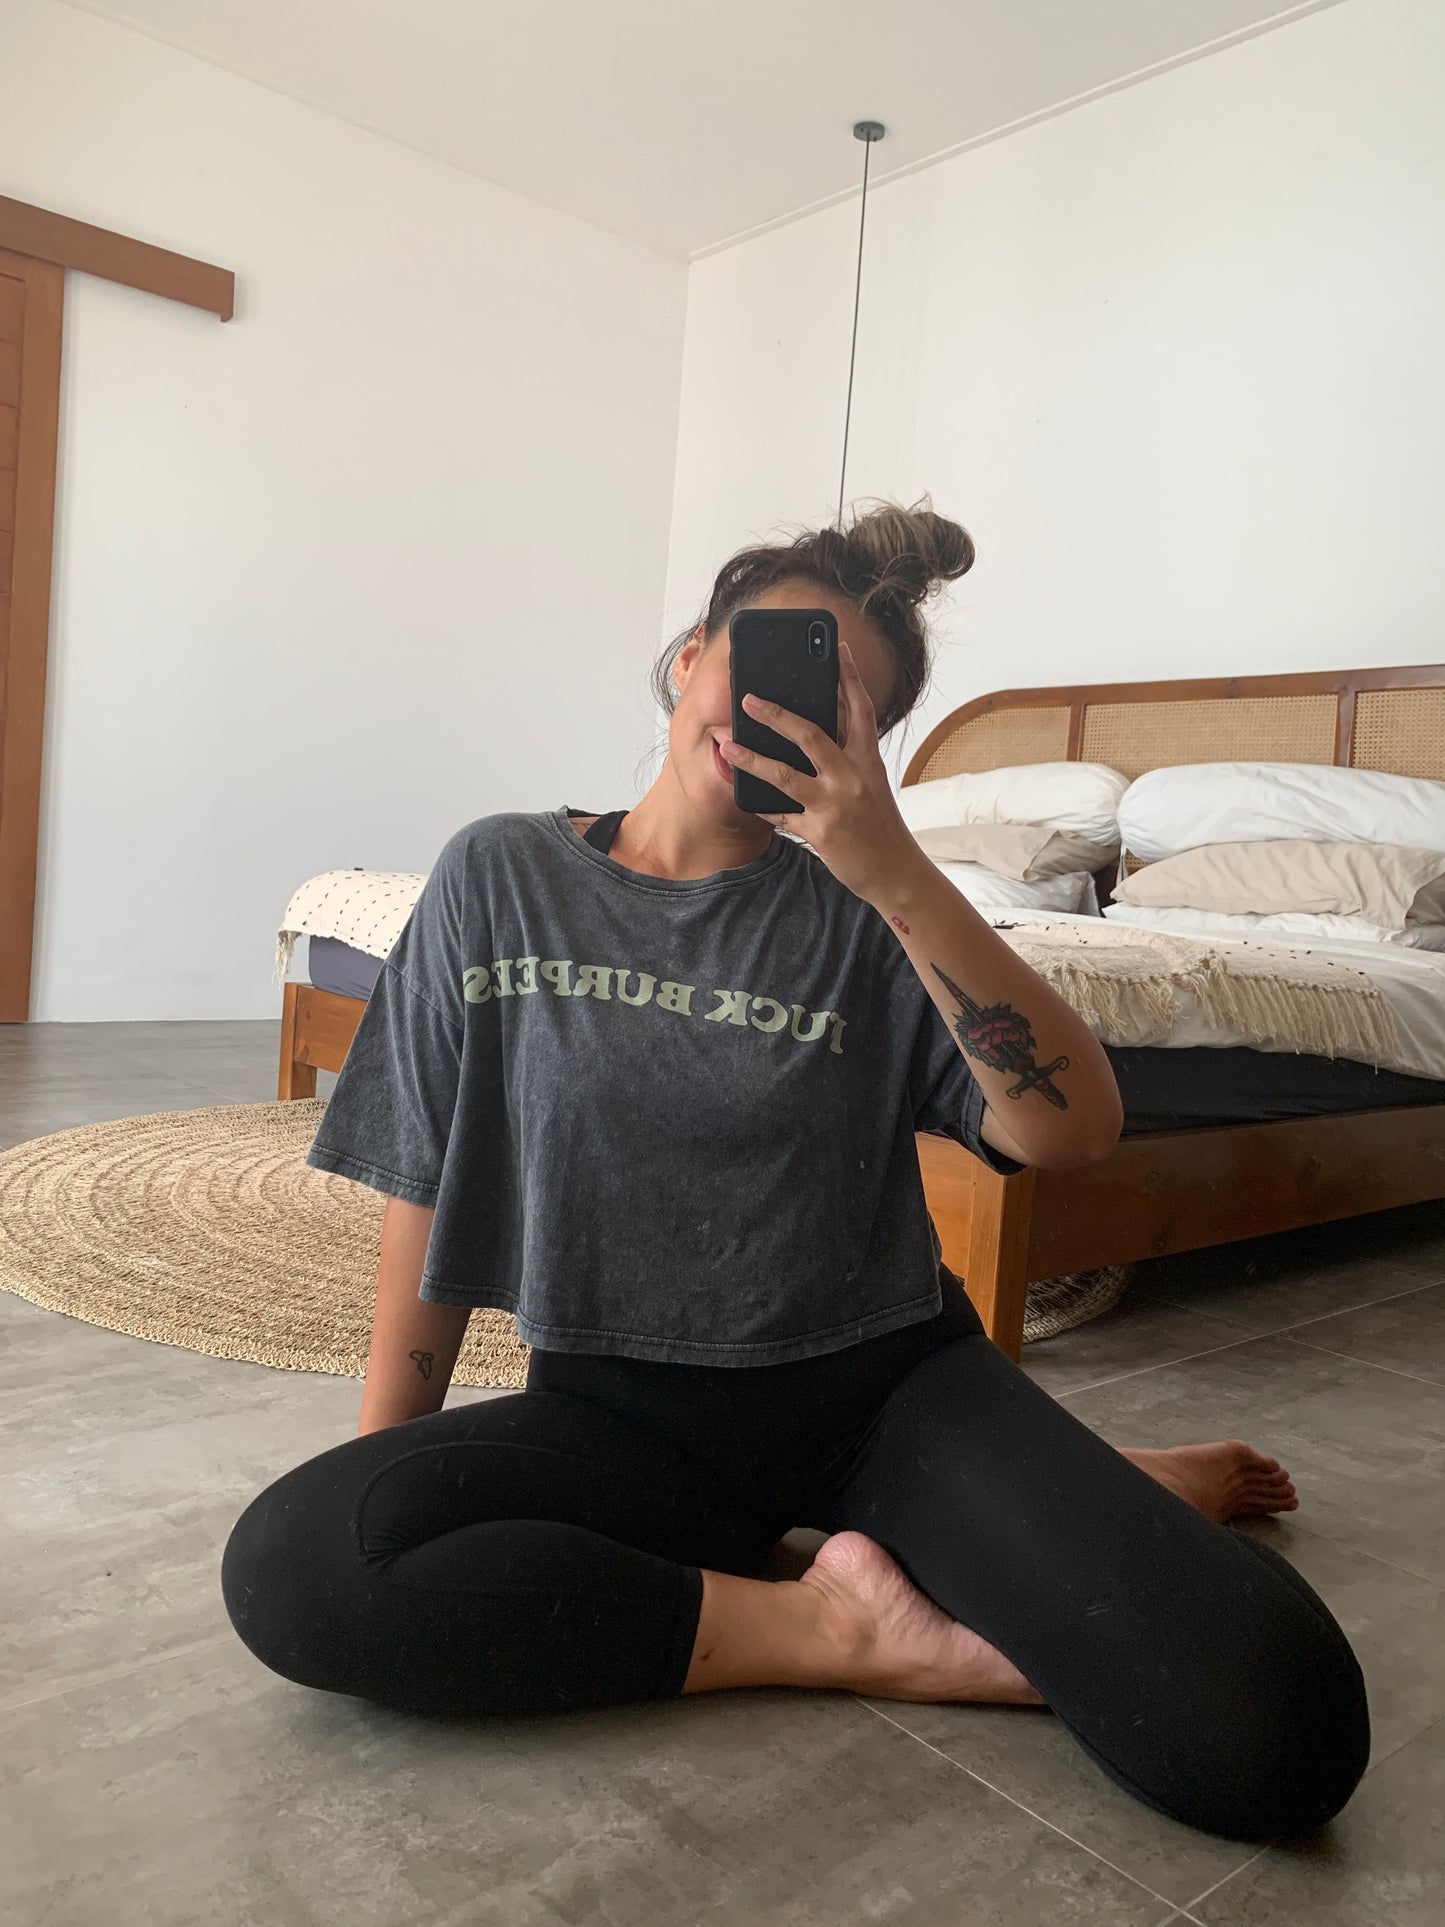 Fuck burpees oversized cropped tee